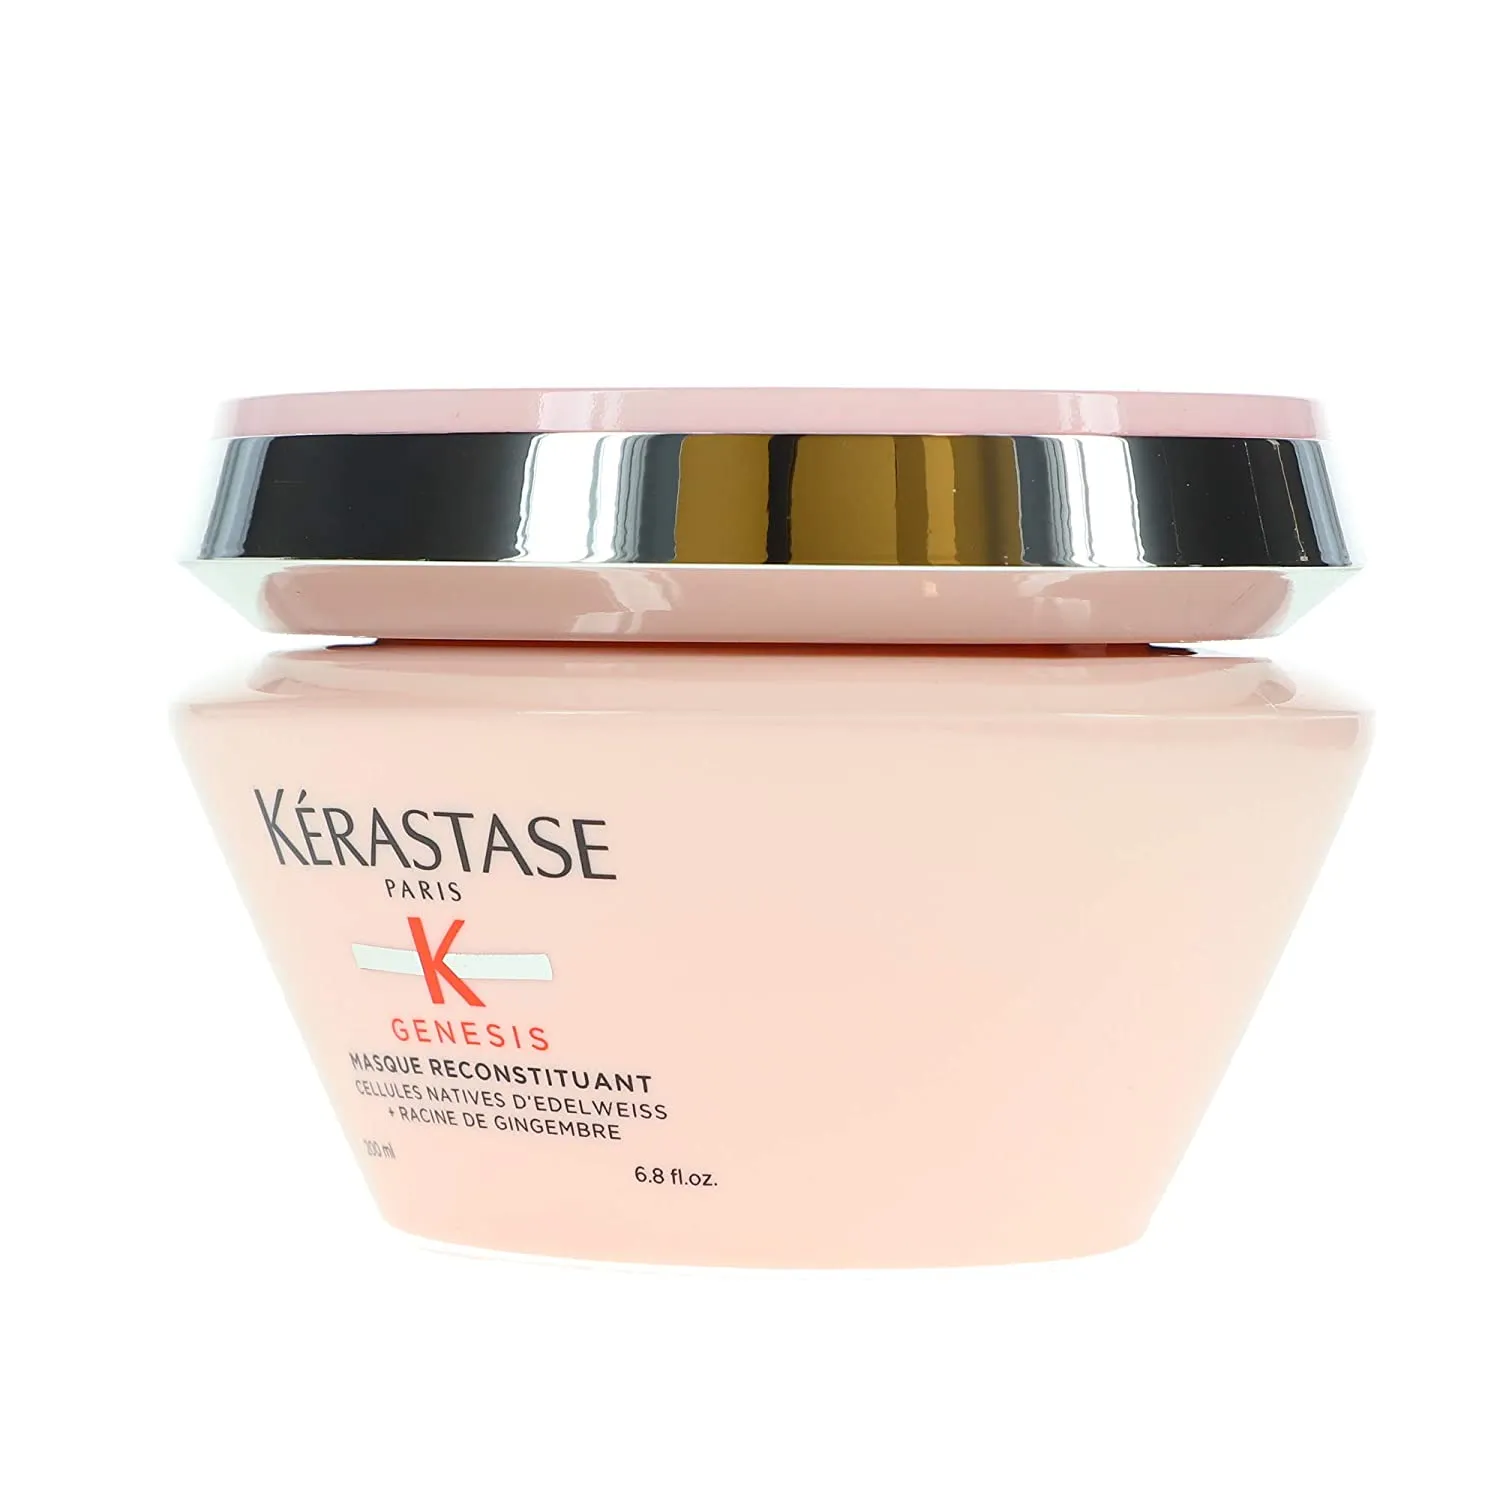 Genesis Masque Reconstituant Hair Mask by Kerastase, the best French hair mask overall.